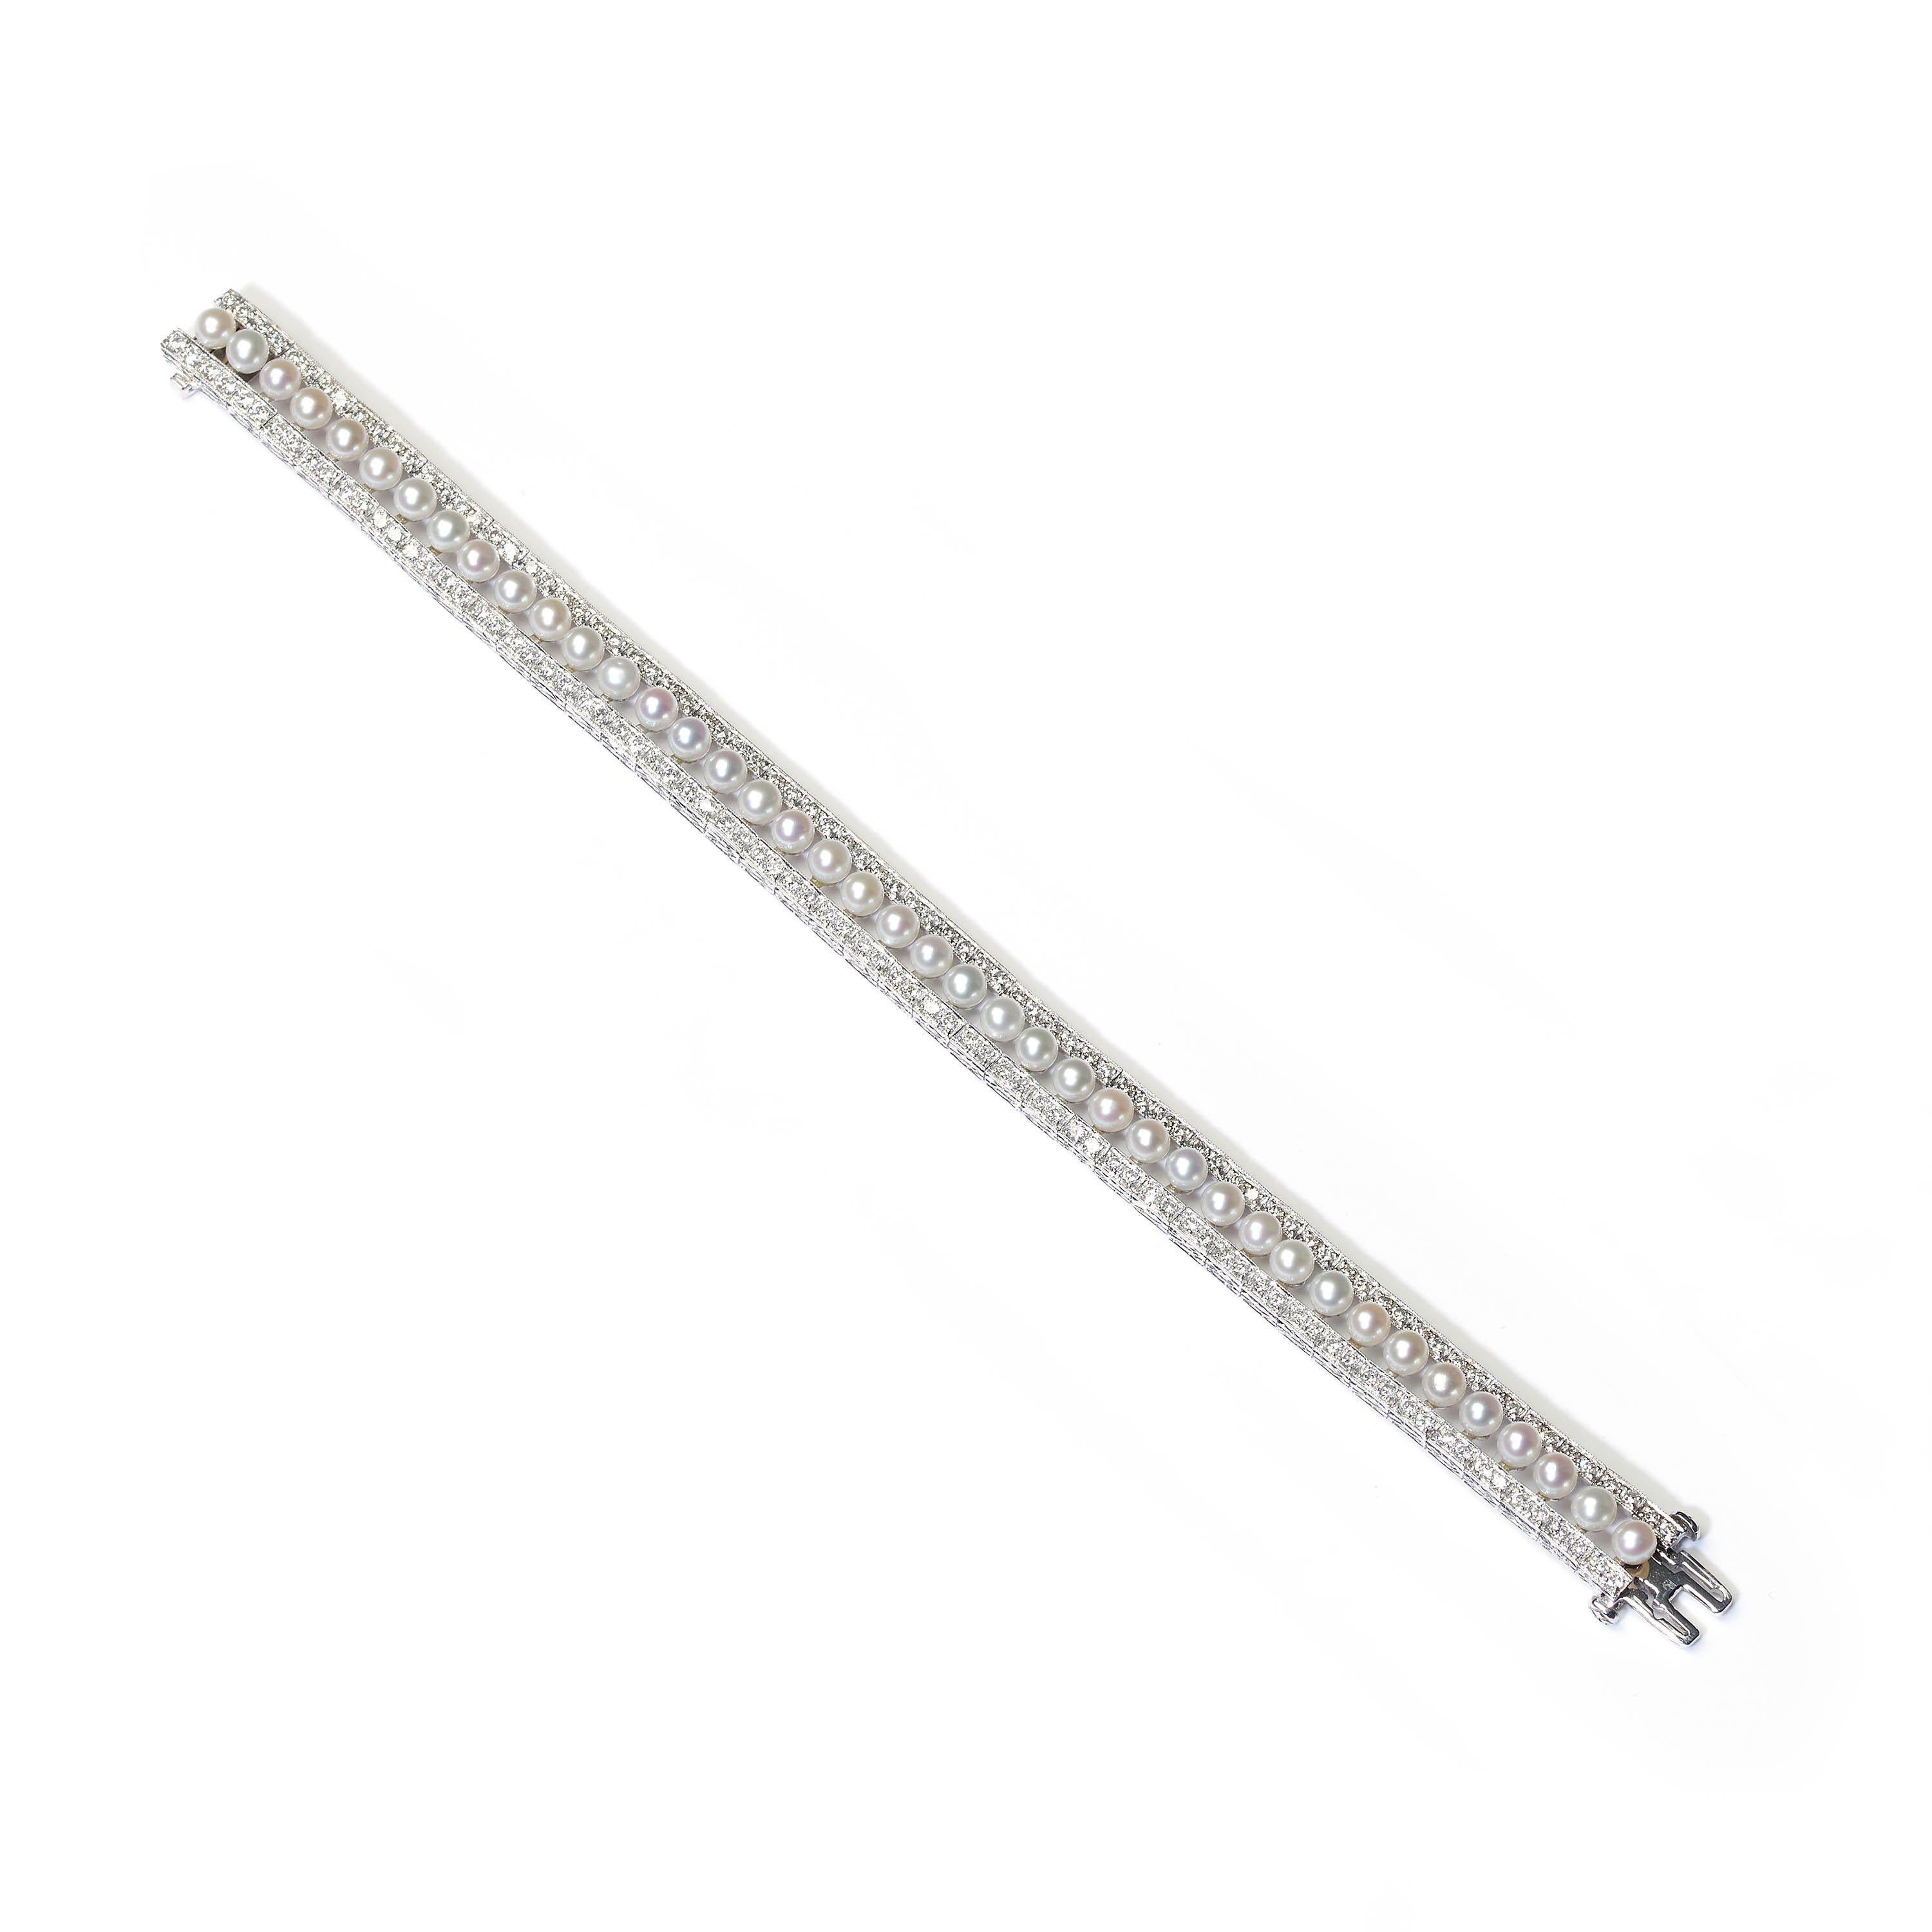 A modern pearl, diamond and platinum line bracelet, featuring a row of forty-one, cultured pearls, with round brilliant-cut diamonds, with a total weight of 3.81ct, in paired grain settings, forming a row either side of the pearls, with millegrain